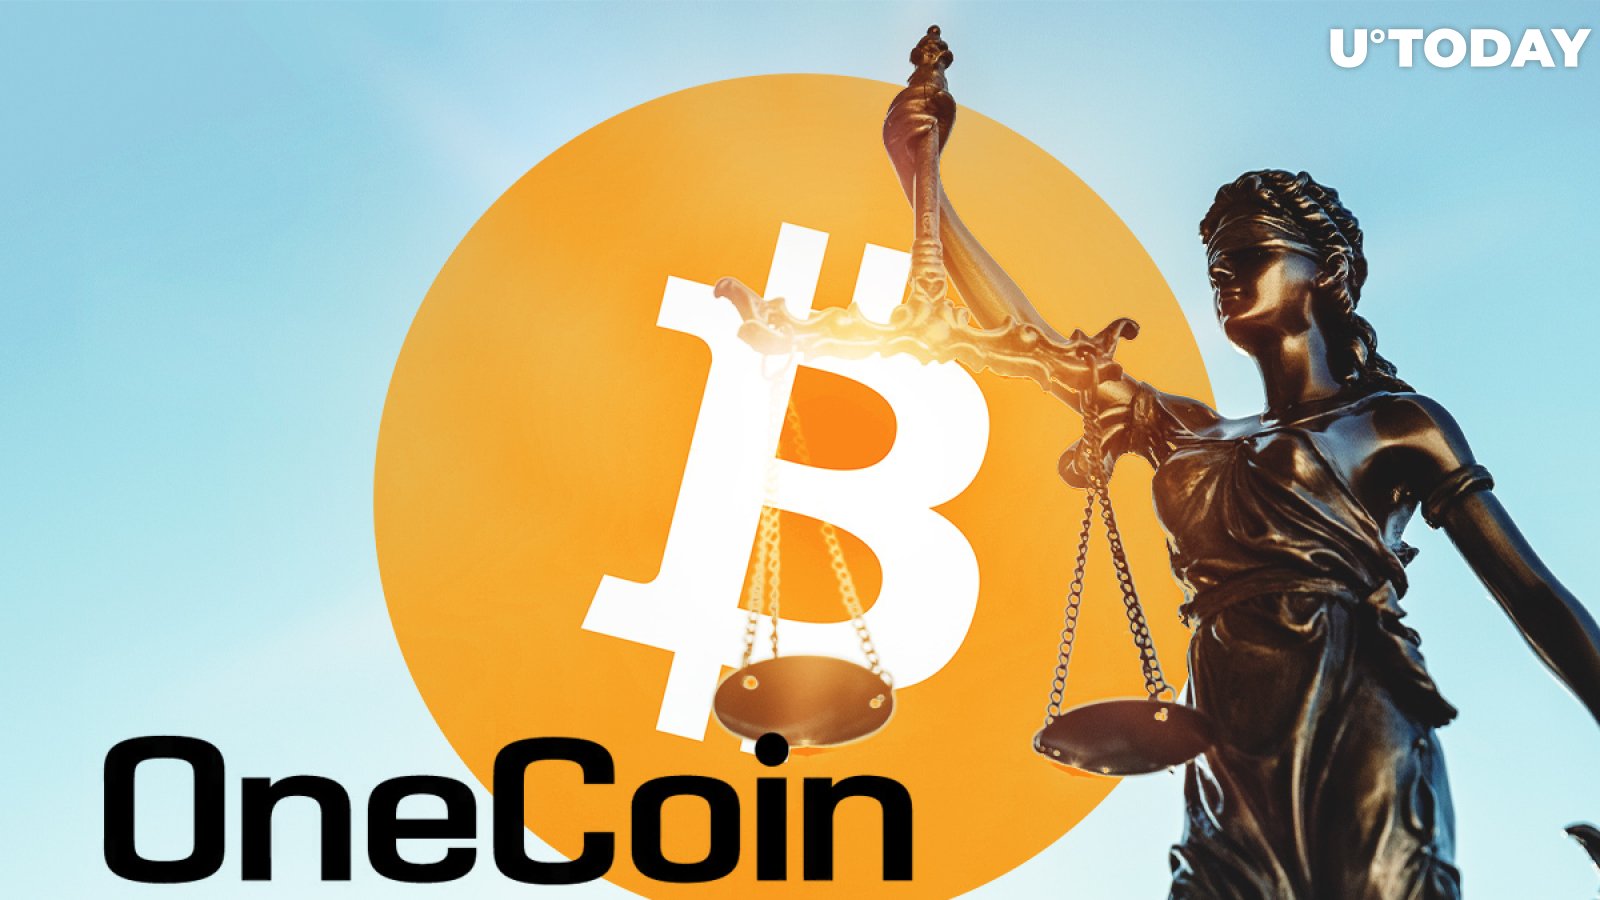 OneCoin $4 Bln Bitcoin Fraud Victims and Co-Mastermind Ignatov Agree On Settlement